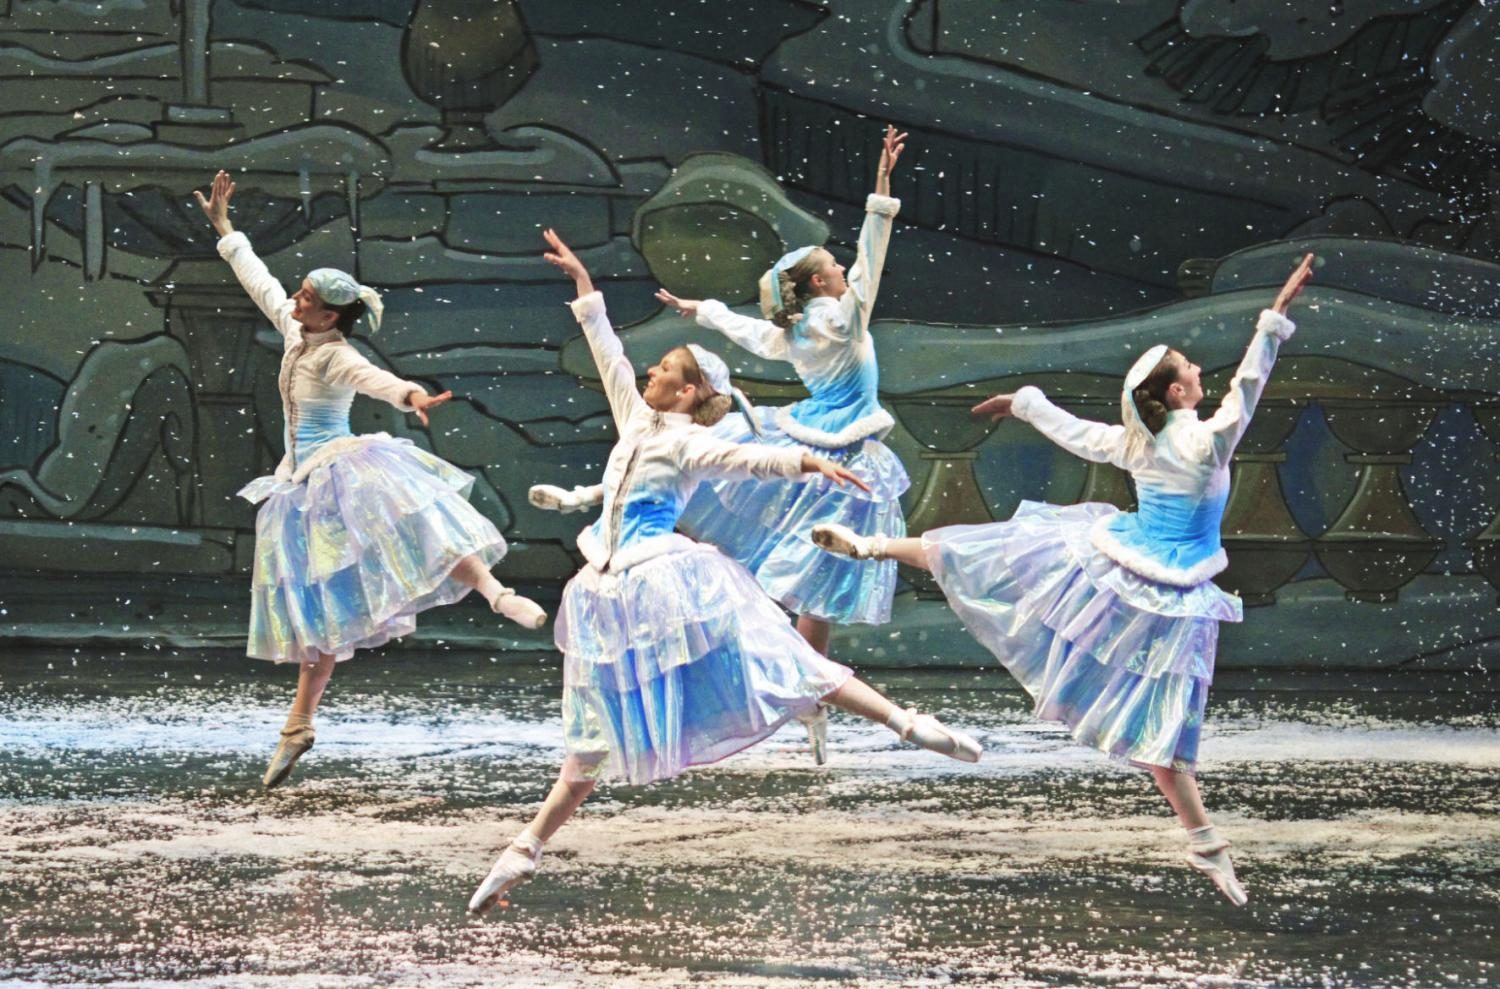 The+Waltz+of+the+Snowflakes+during+one+of+Eugene+Ballet%E2%80%99s+performances+of+%E2%80%9CThe+Nutcracker.%E2%80%9D+The+Eugene+Ballet+will+perform+with+Festival+Dance+Sunday%2C+Dec.+14%2C+2014.